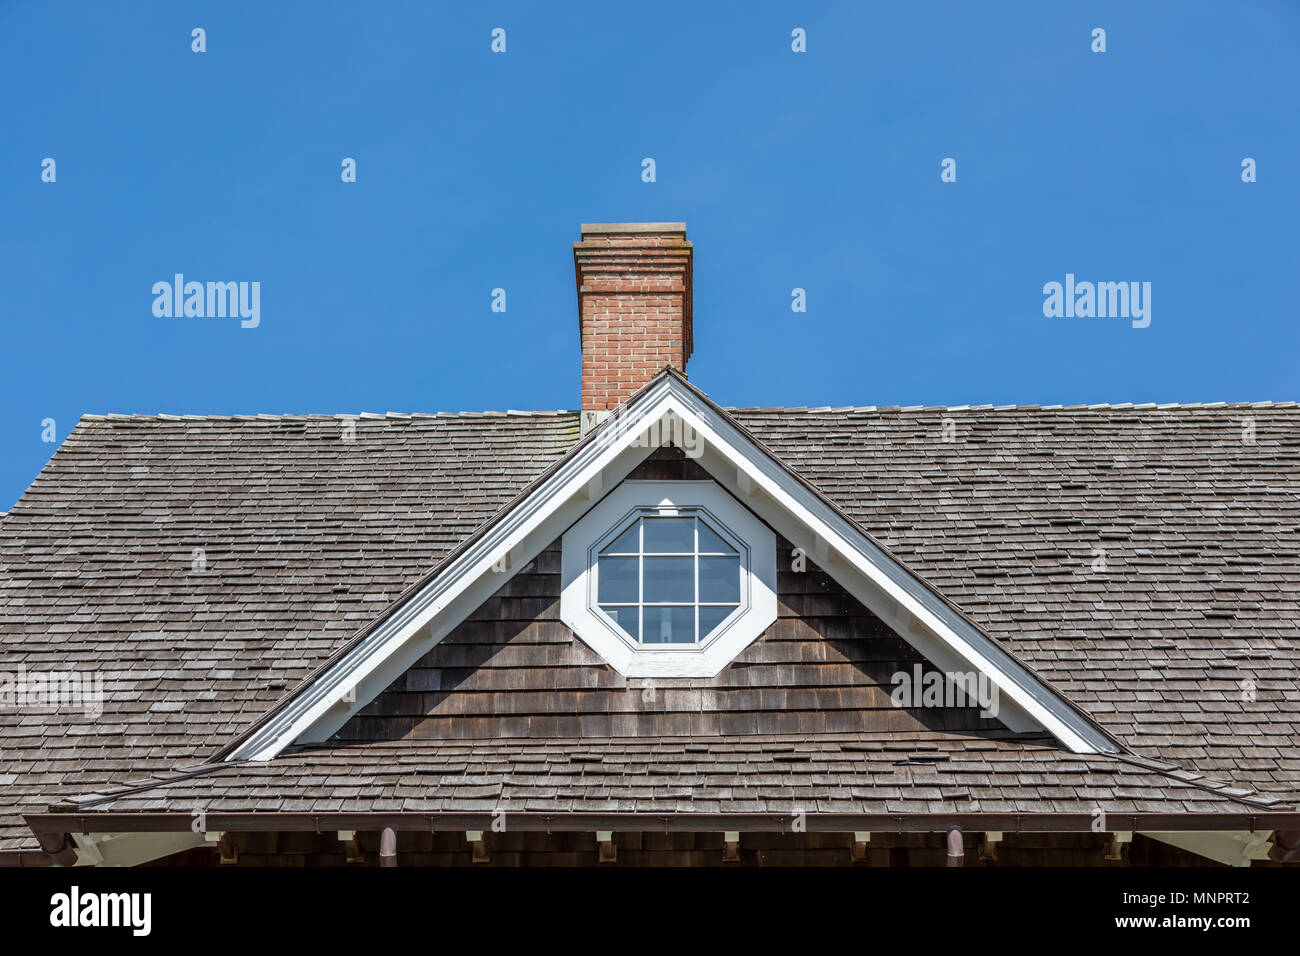 dormer on a hip roof with octangle window Stock Photo